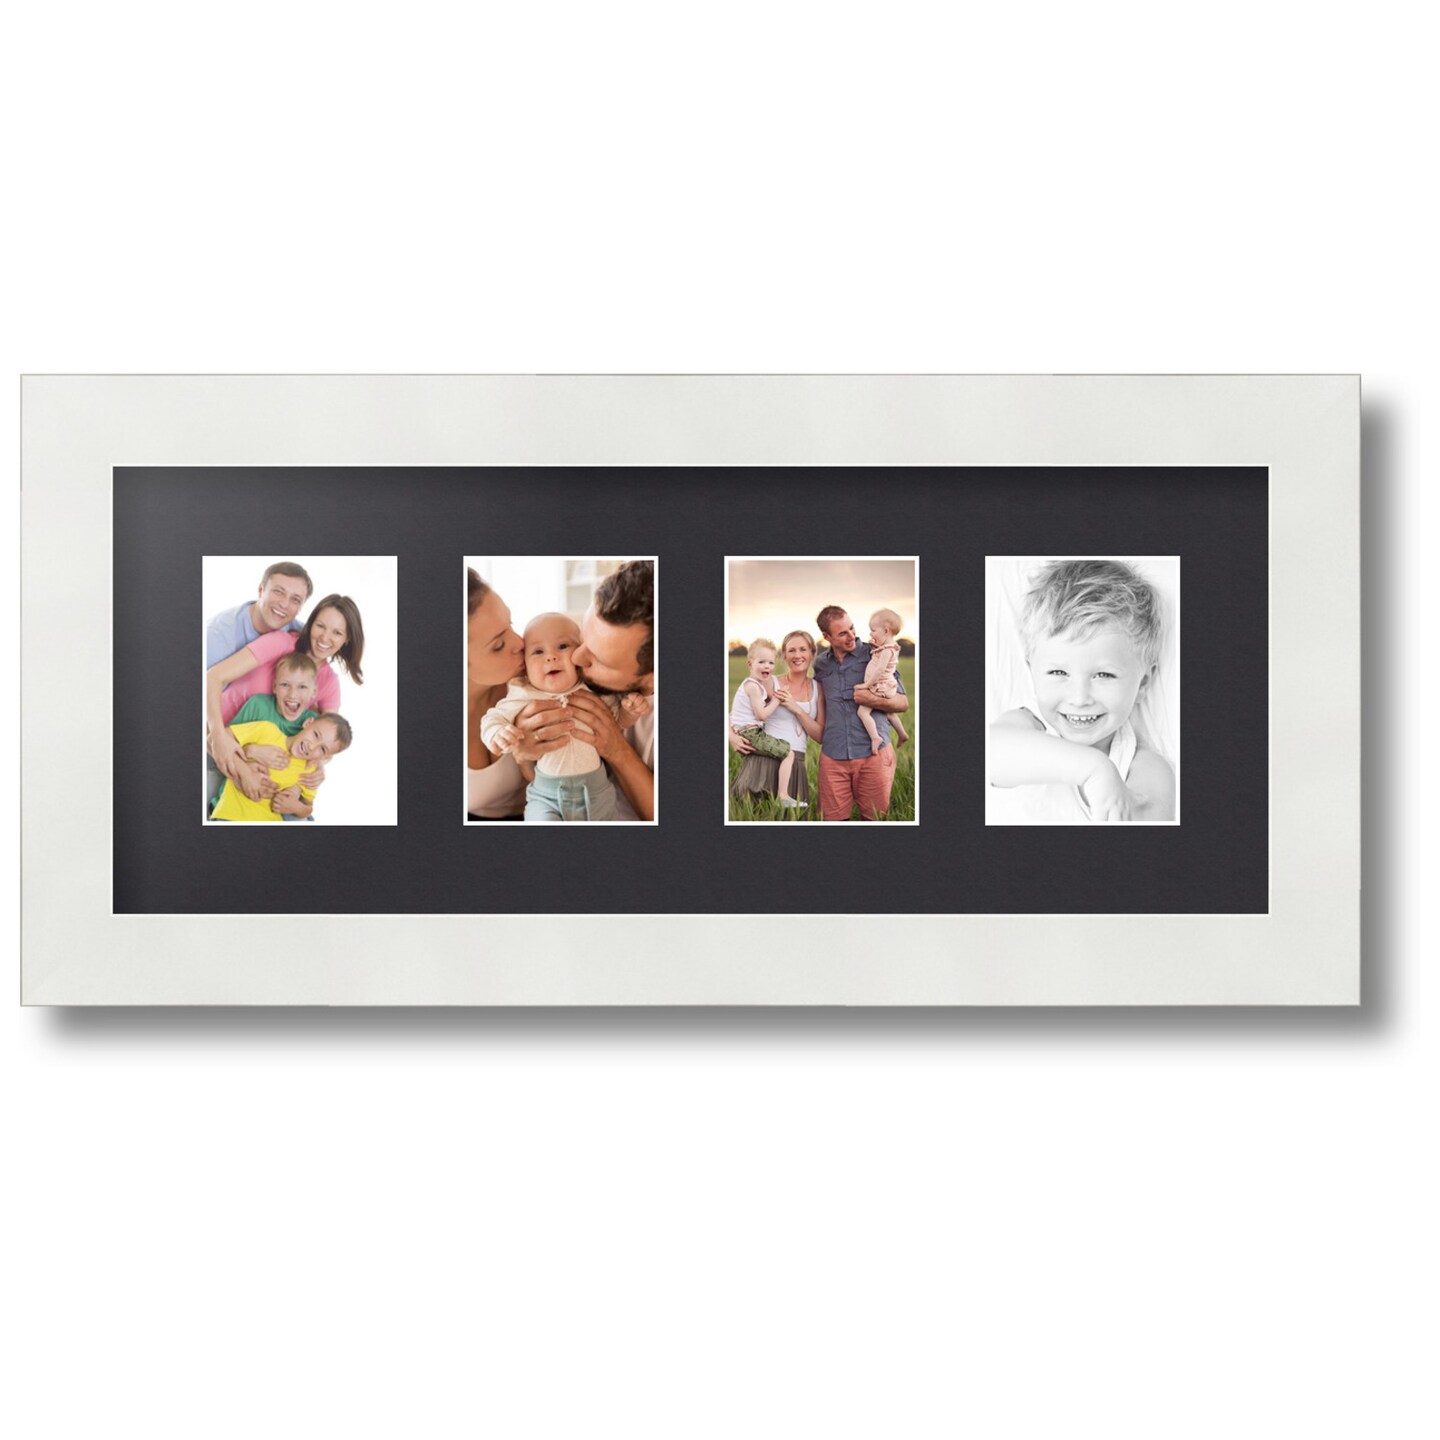 ArtToFrames Collage Photo Picture Frame with 4 - 2.5x3.5 inch Openings, Framed in White with Over 62 Mat Color Options and Regular Glass (CSM-3966-20)